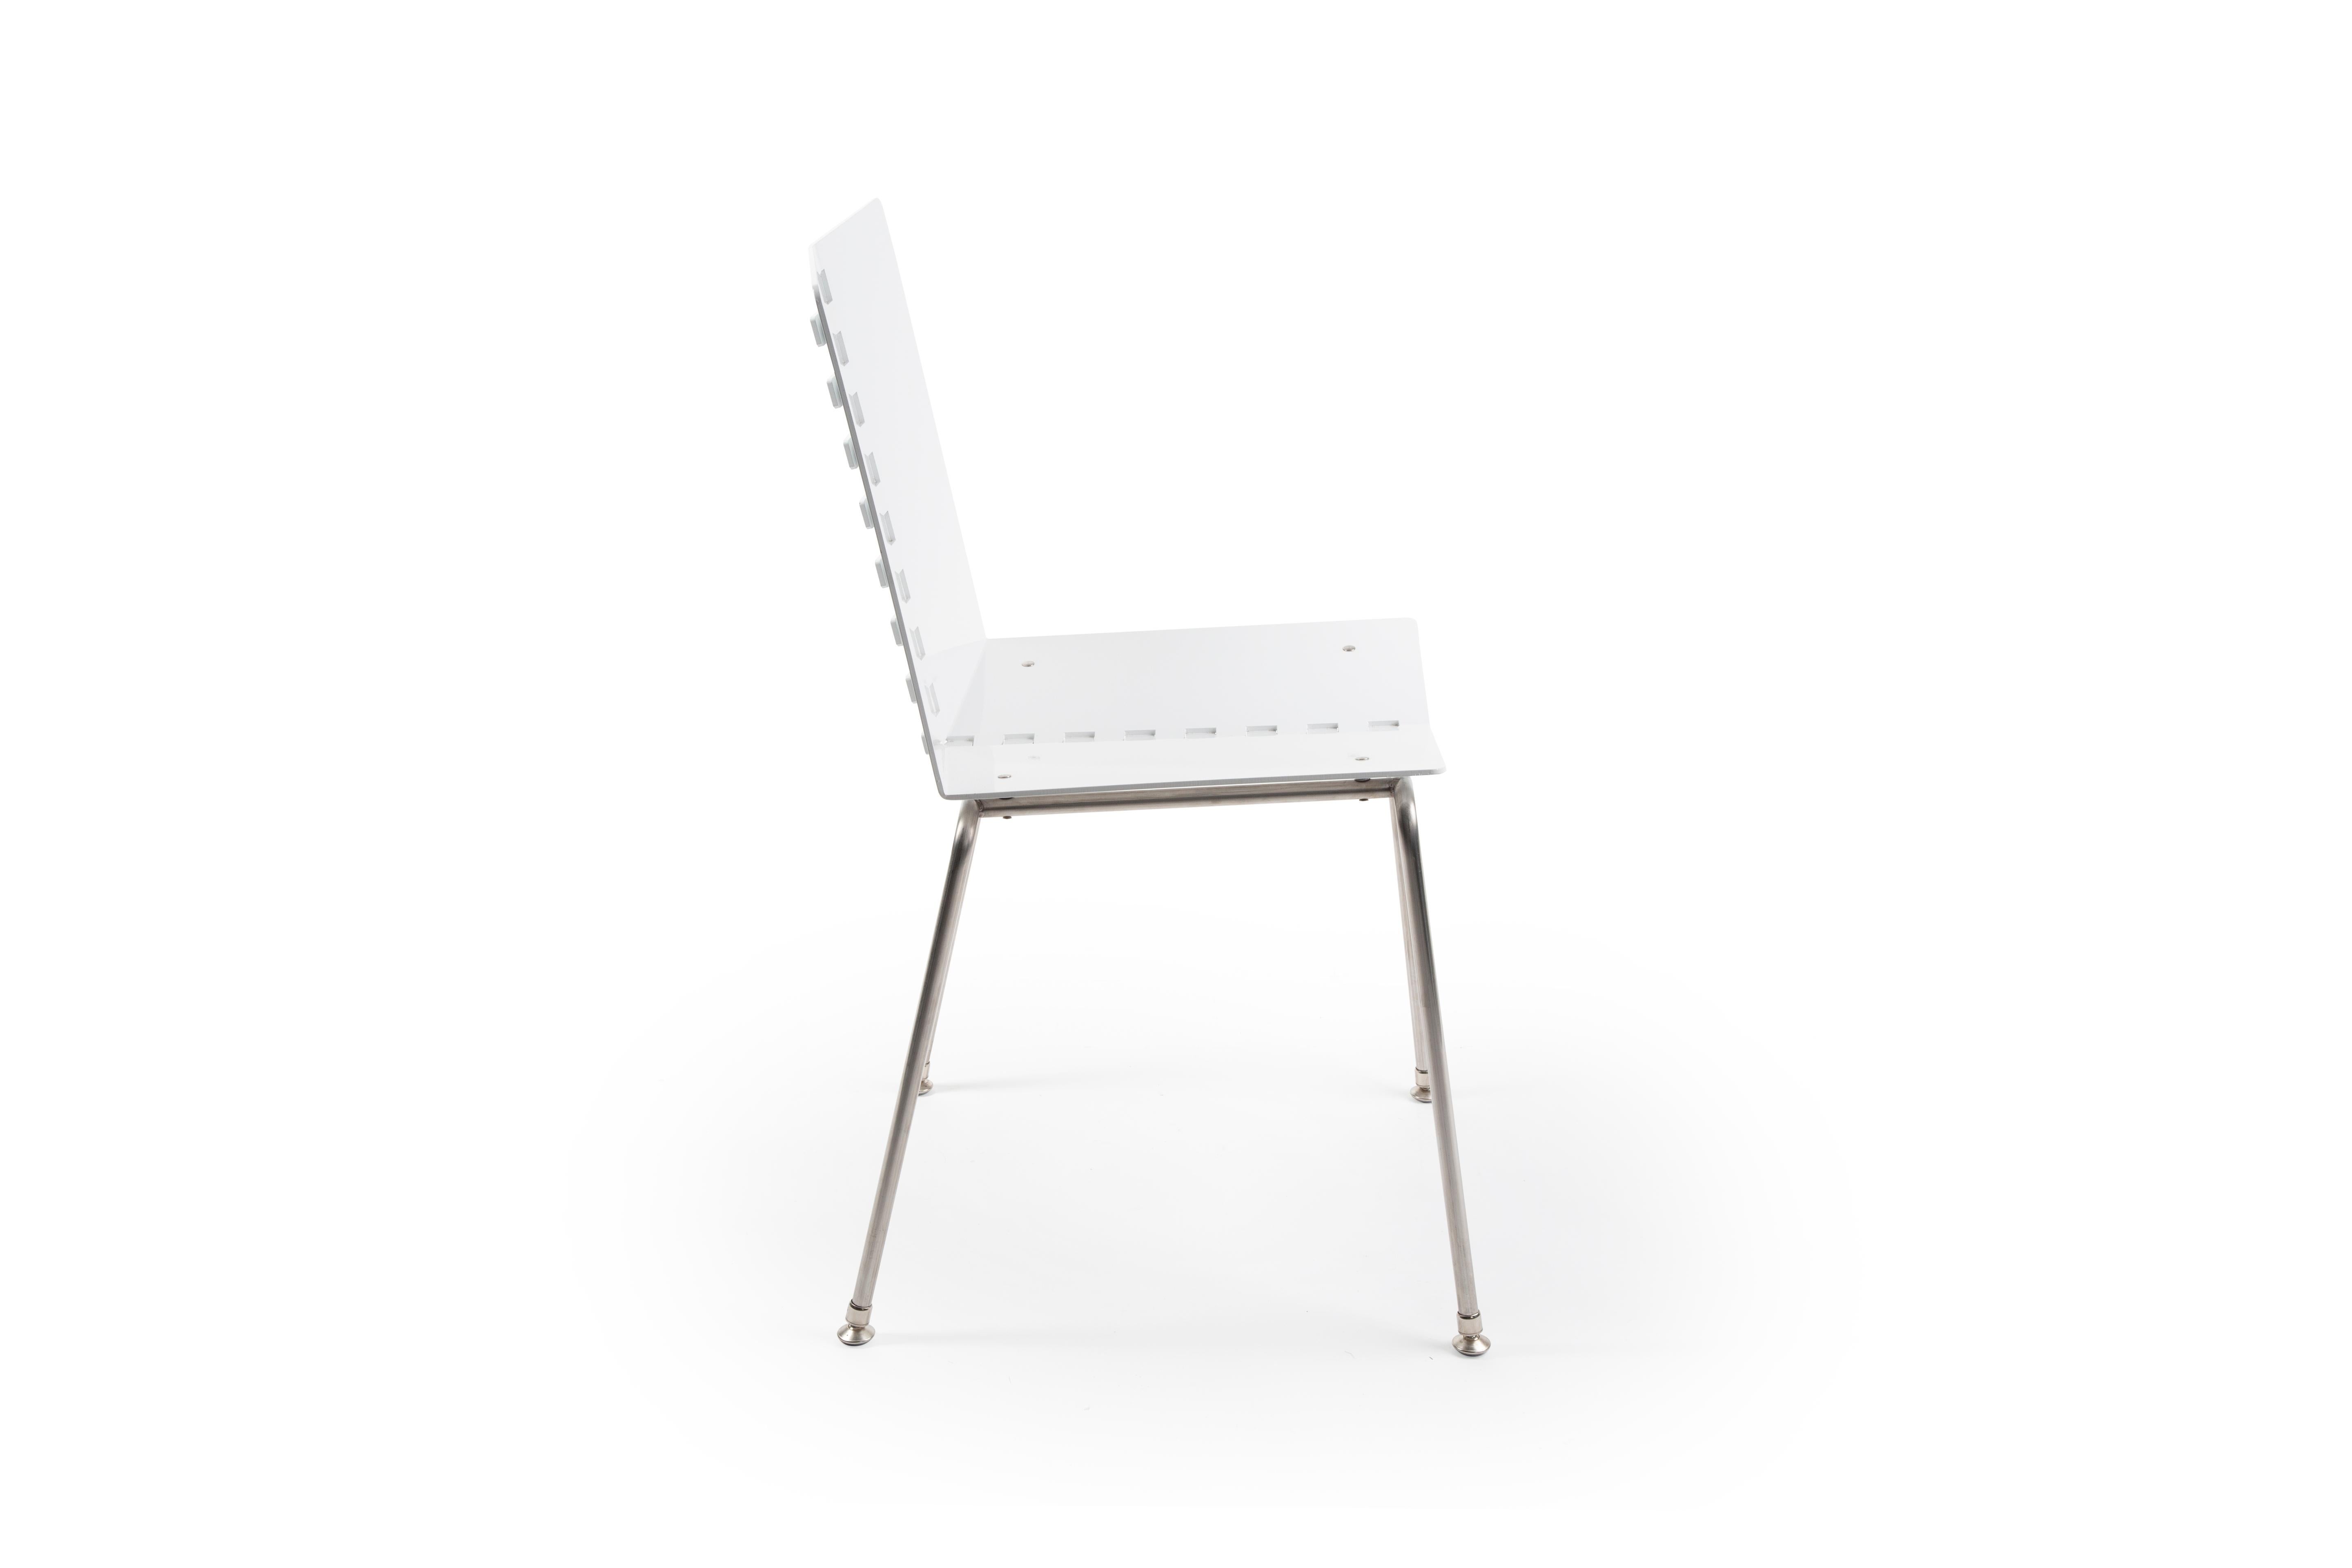 Contemporary Minimal Modern Exterior Dining Chair Powder Coated with Stainless Steel Legs For Sale